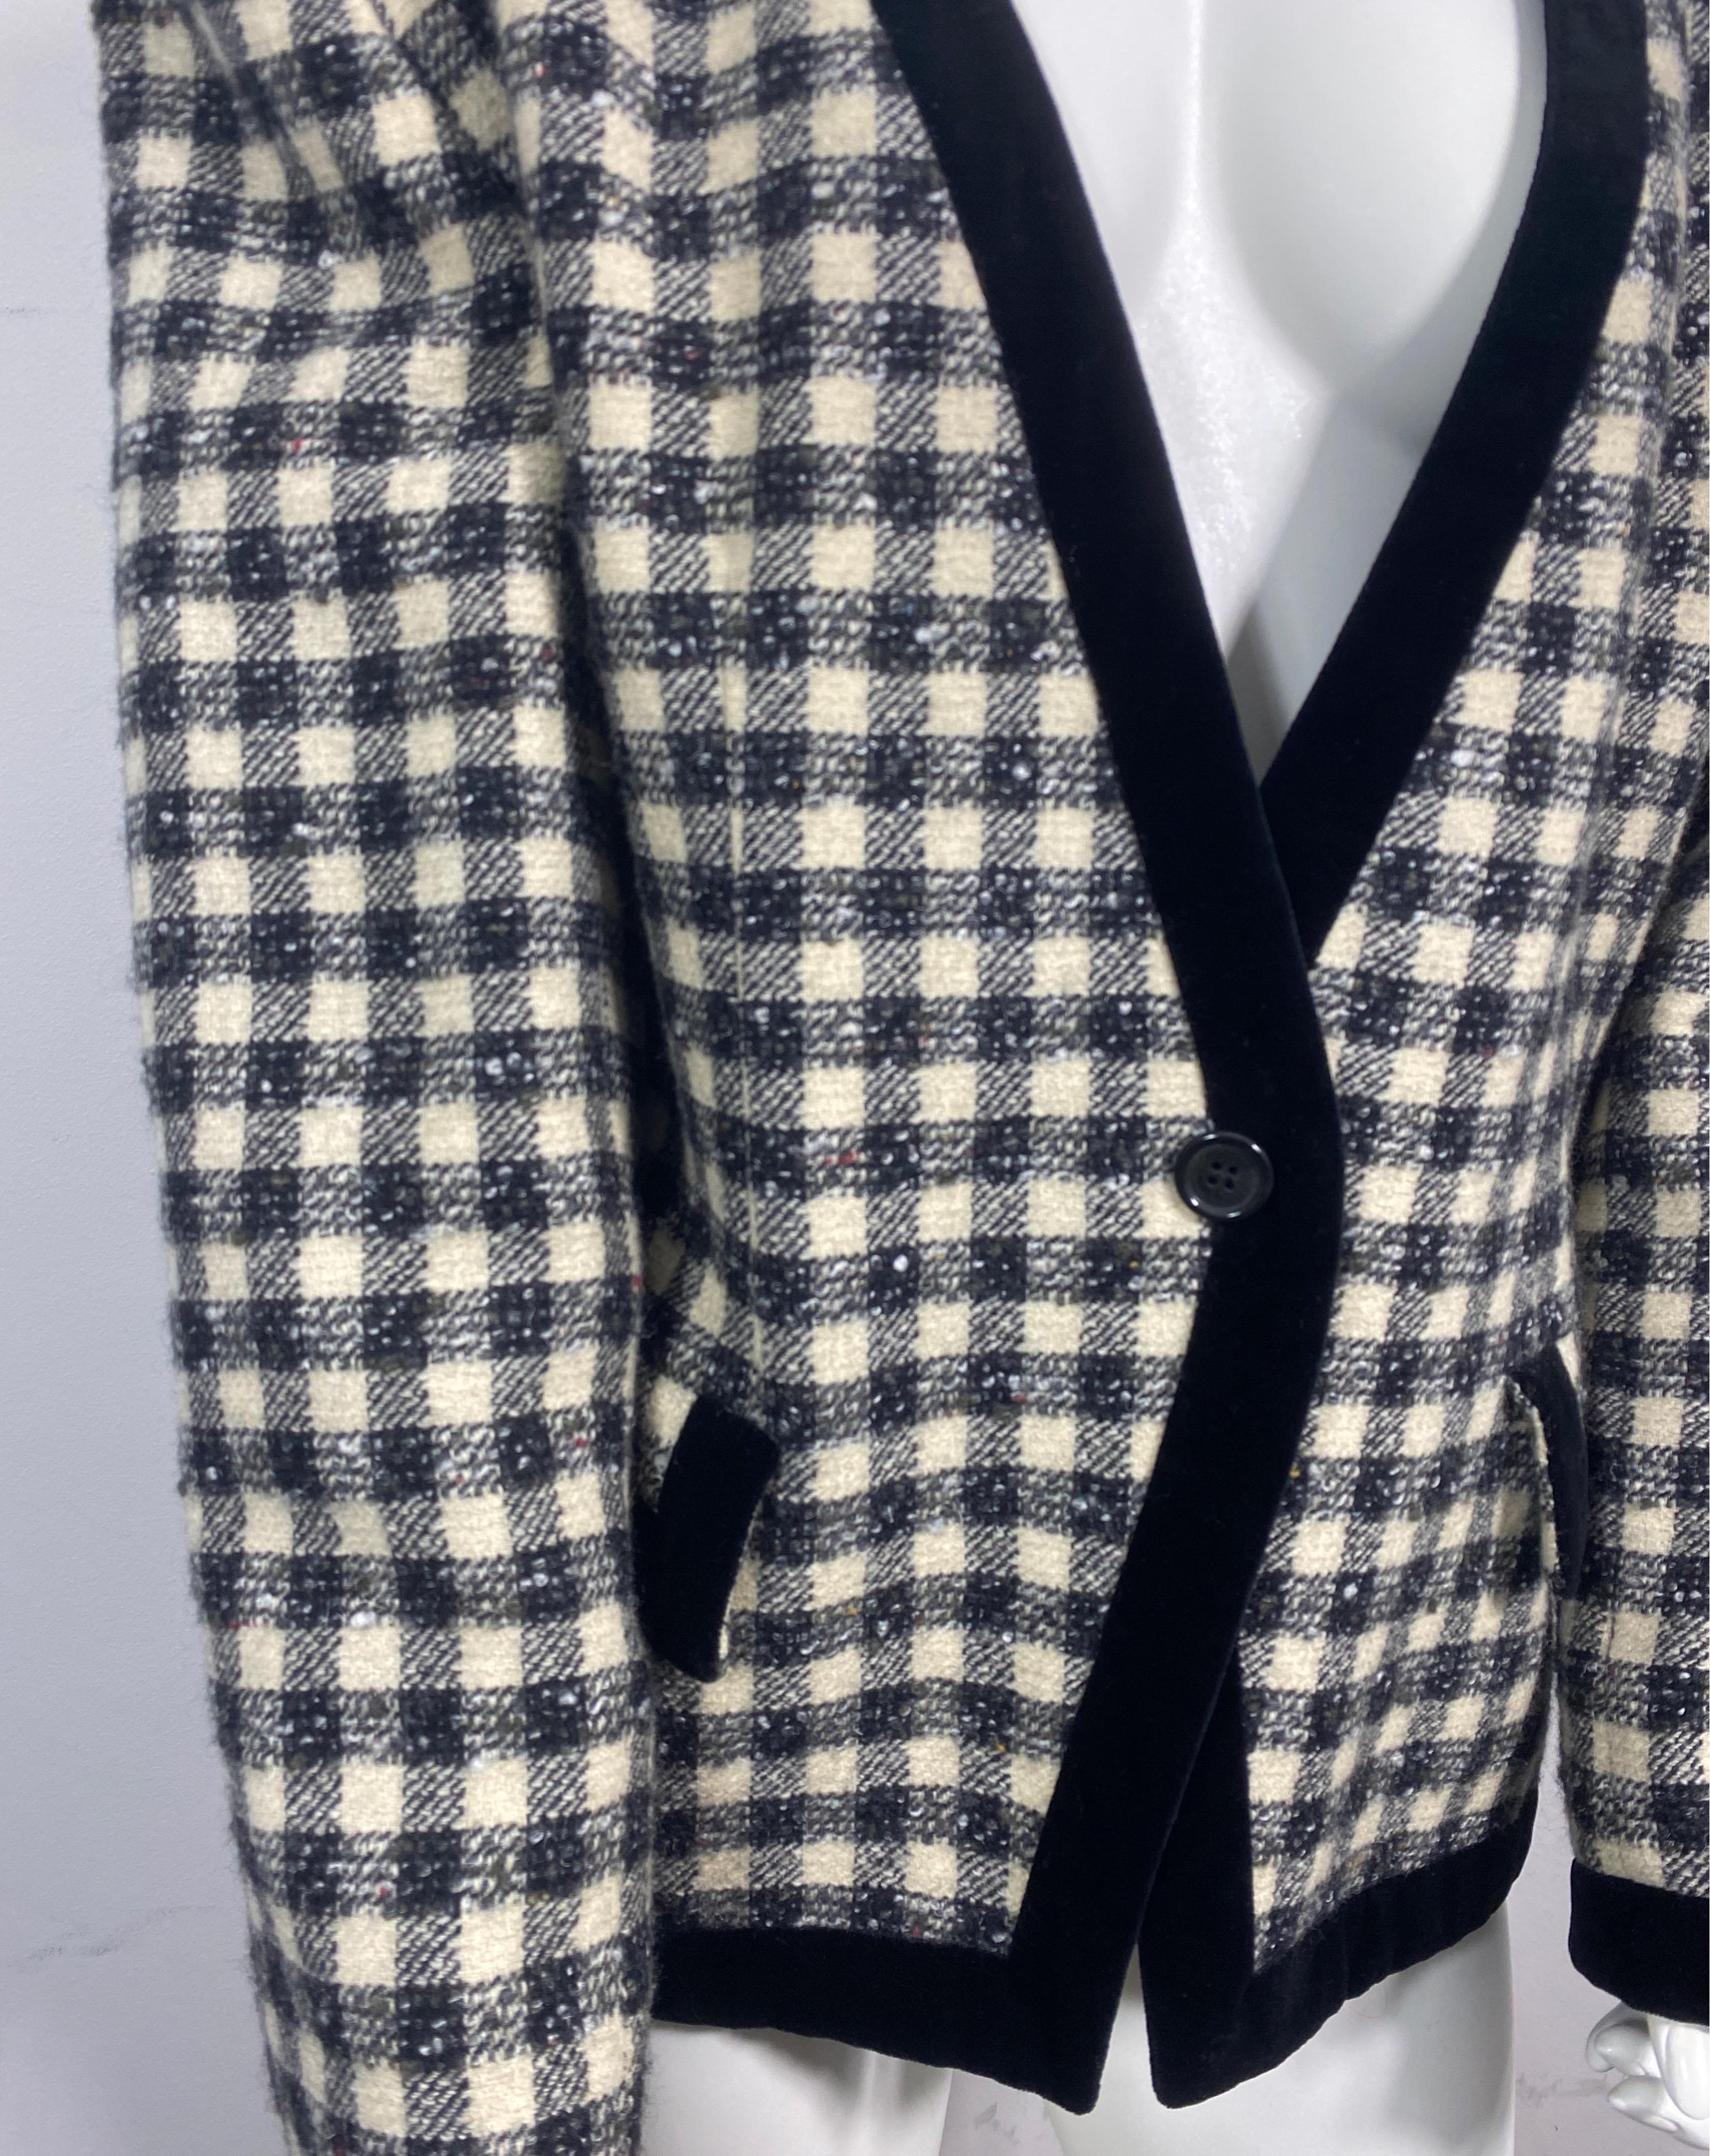 Giorgio Armani 1990’s Black and Ivory Tweed and Velvet Checkered Jacket -Size 46 In Good Condition For Sale In West Palm Beach, FL